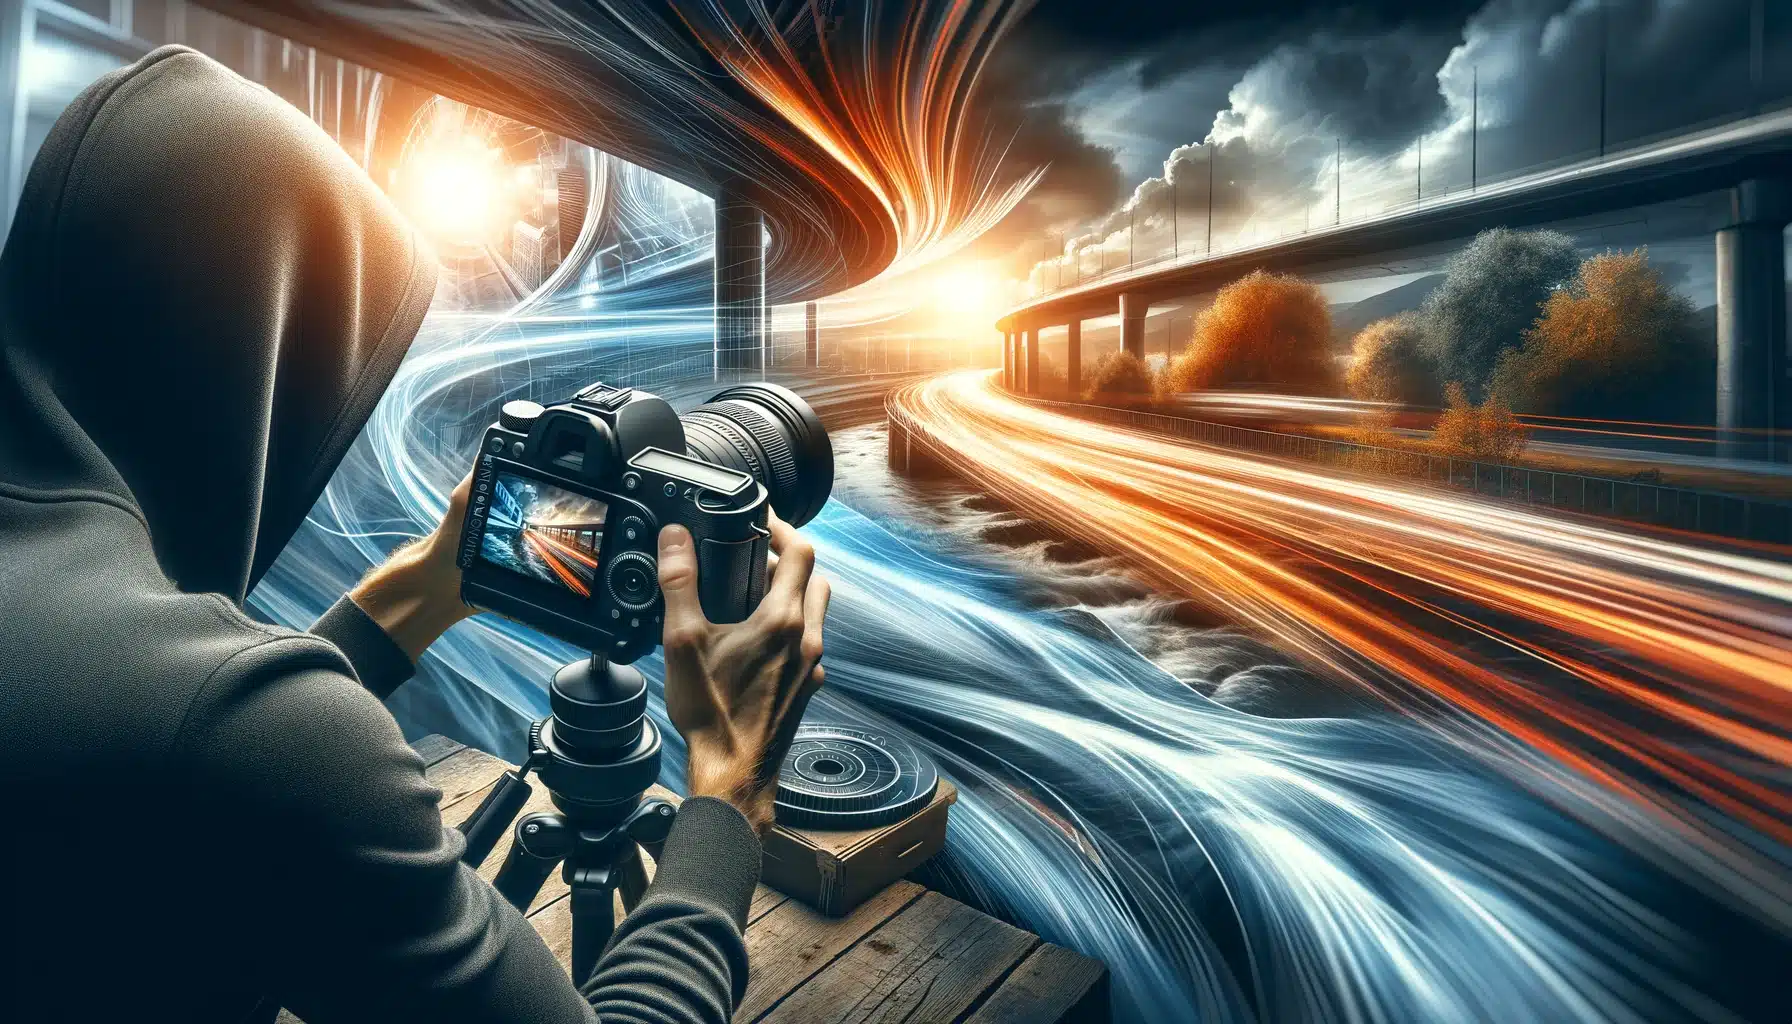 Person comparing the effects of different shutter speeds on a camera with a dynamic background scene